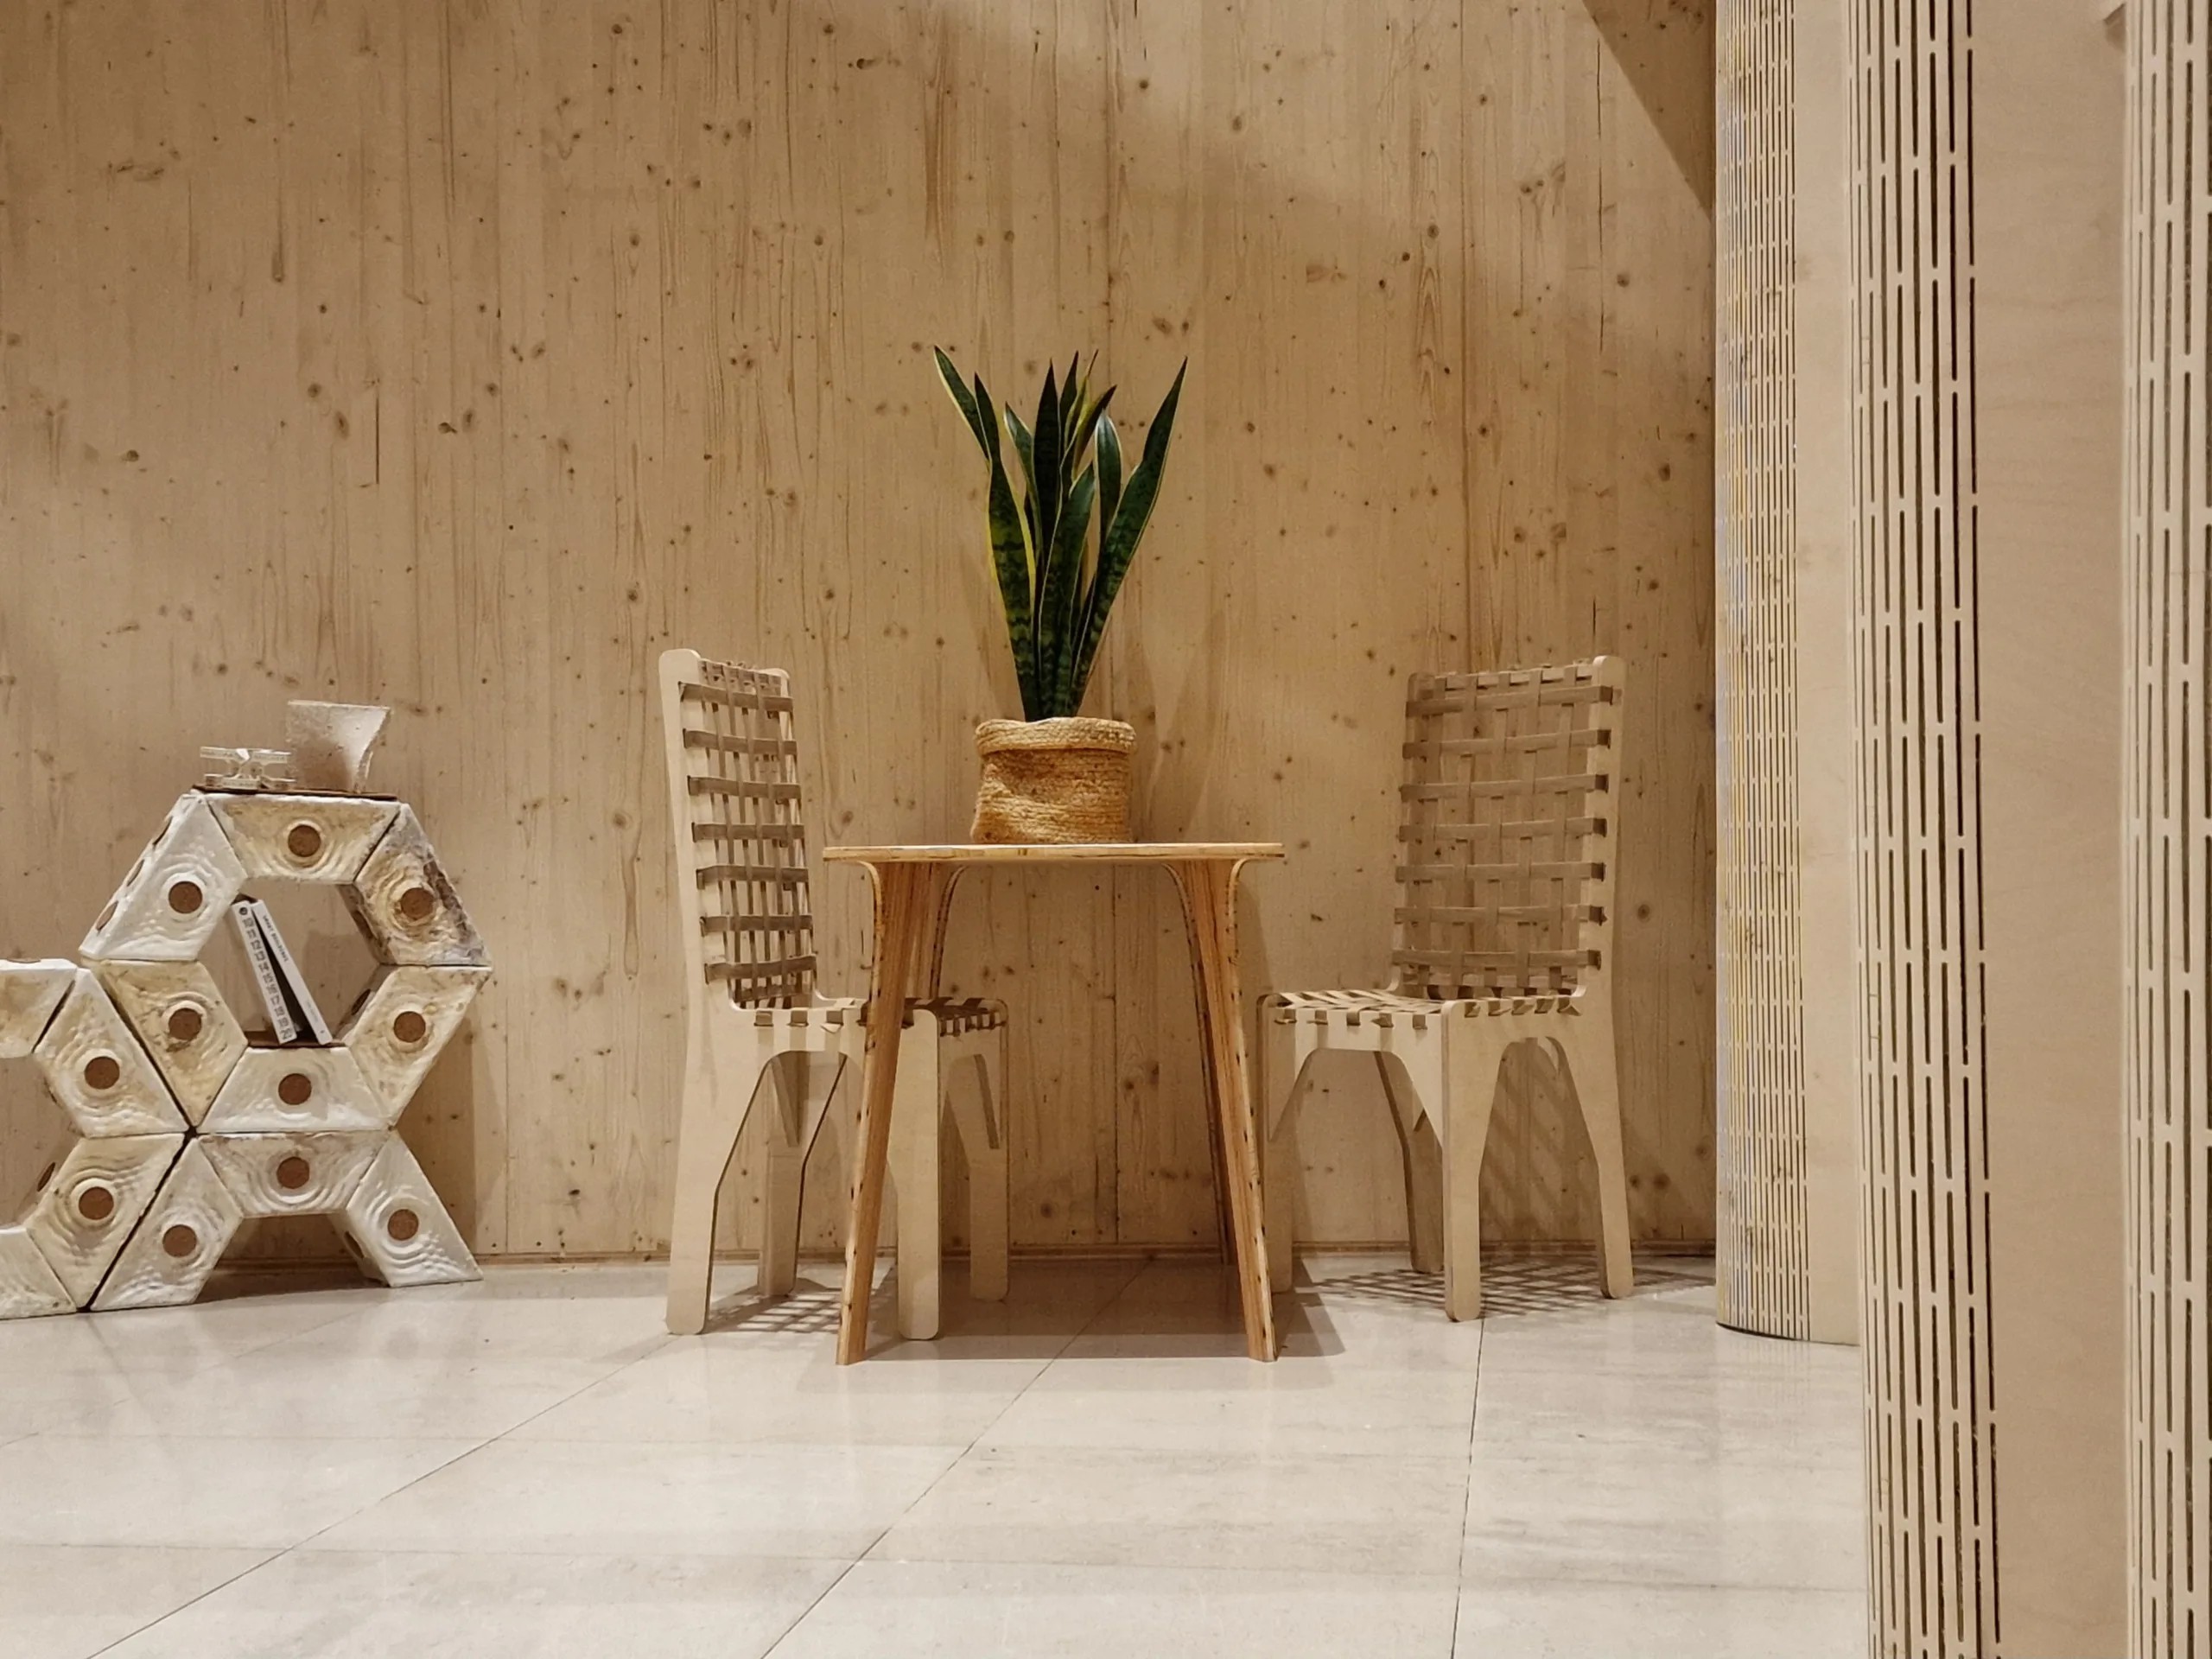 Researchers at Cambridge’s Centre for Natural Material Innovation and partners PLP Architecture have just unveiled Ephemeral, an innovative alternative using engineered wood, at the London Design Biennale at London’s Somerset House (1st – 25th June 2023).